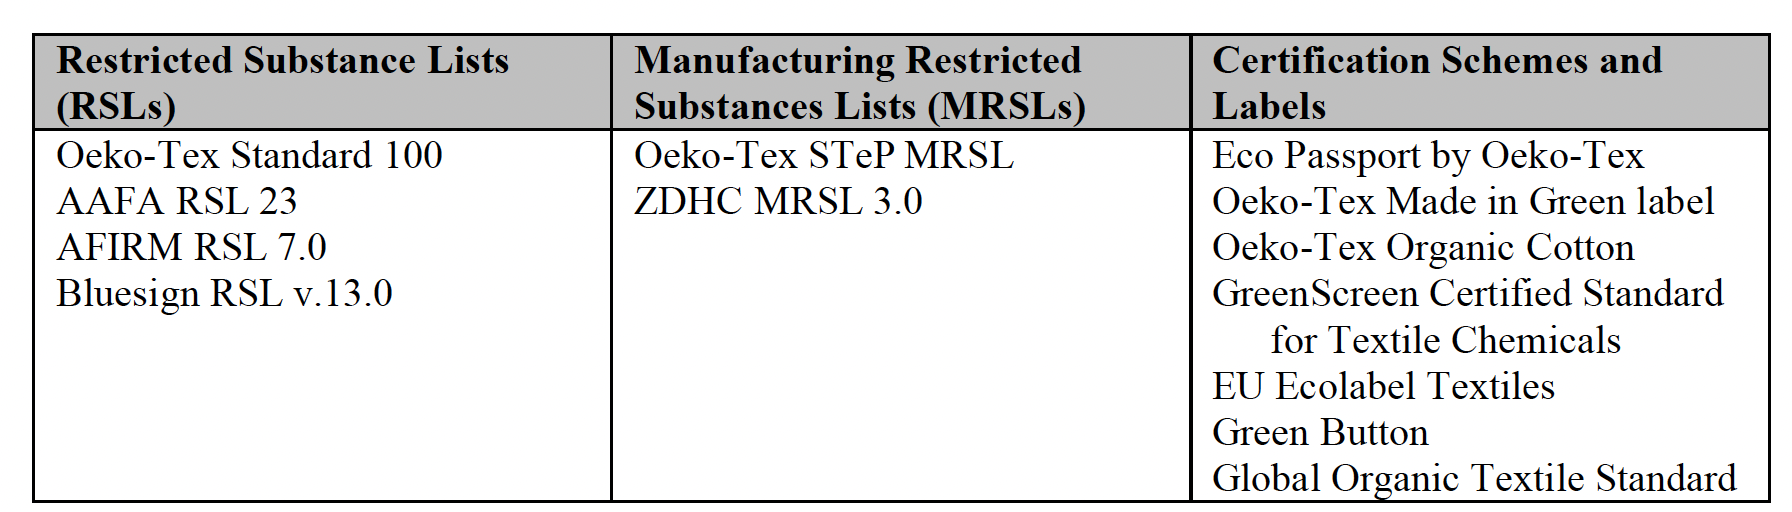  Relevant restricted lists, certification schemes and labels regarding chemicals in textiles